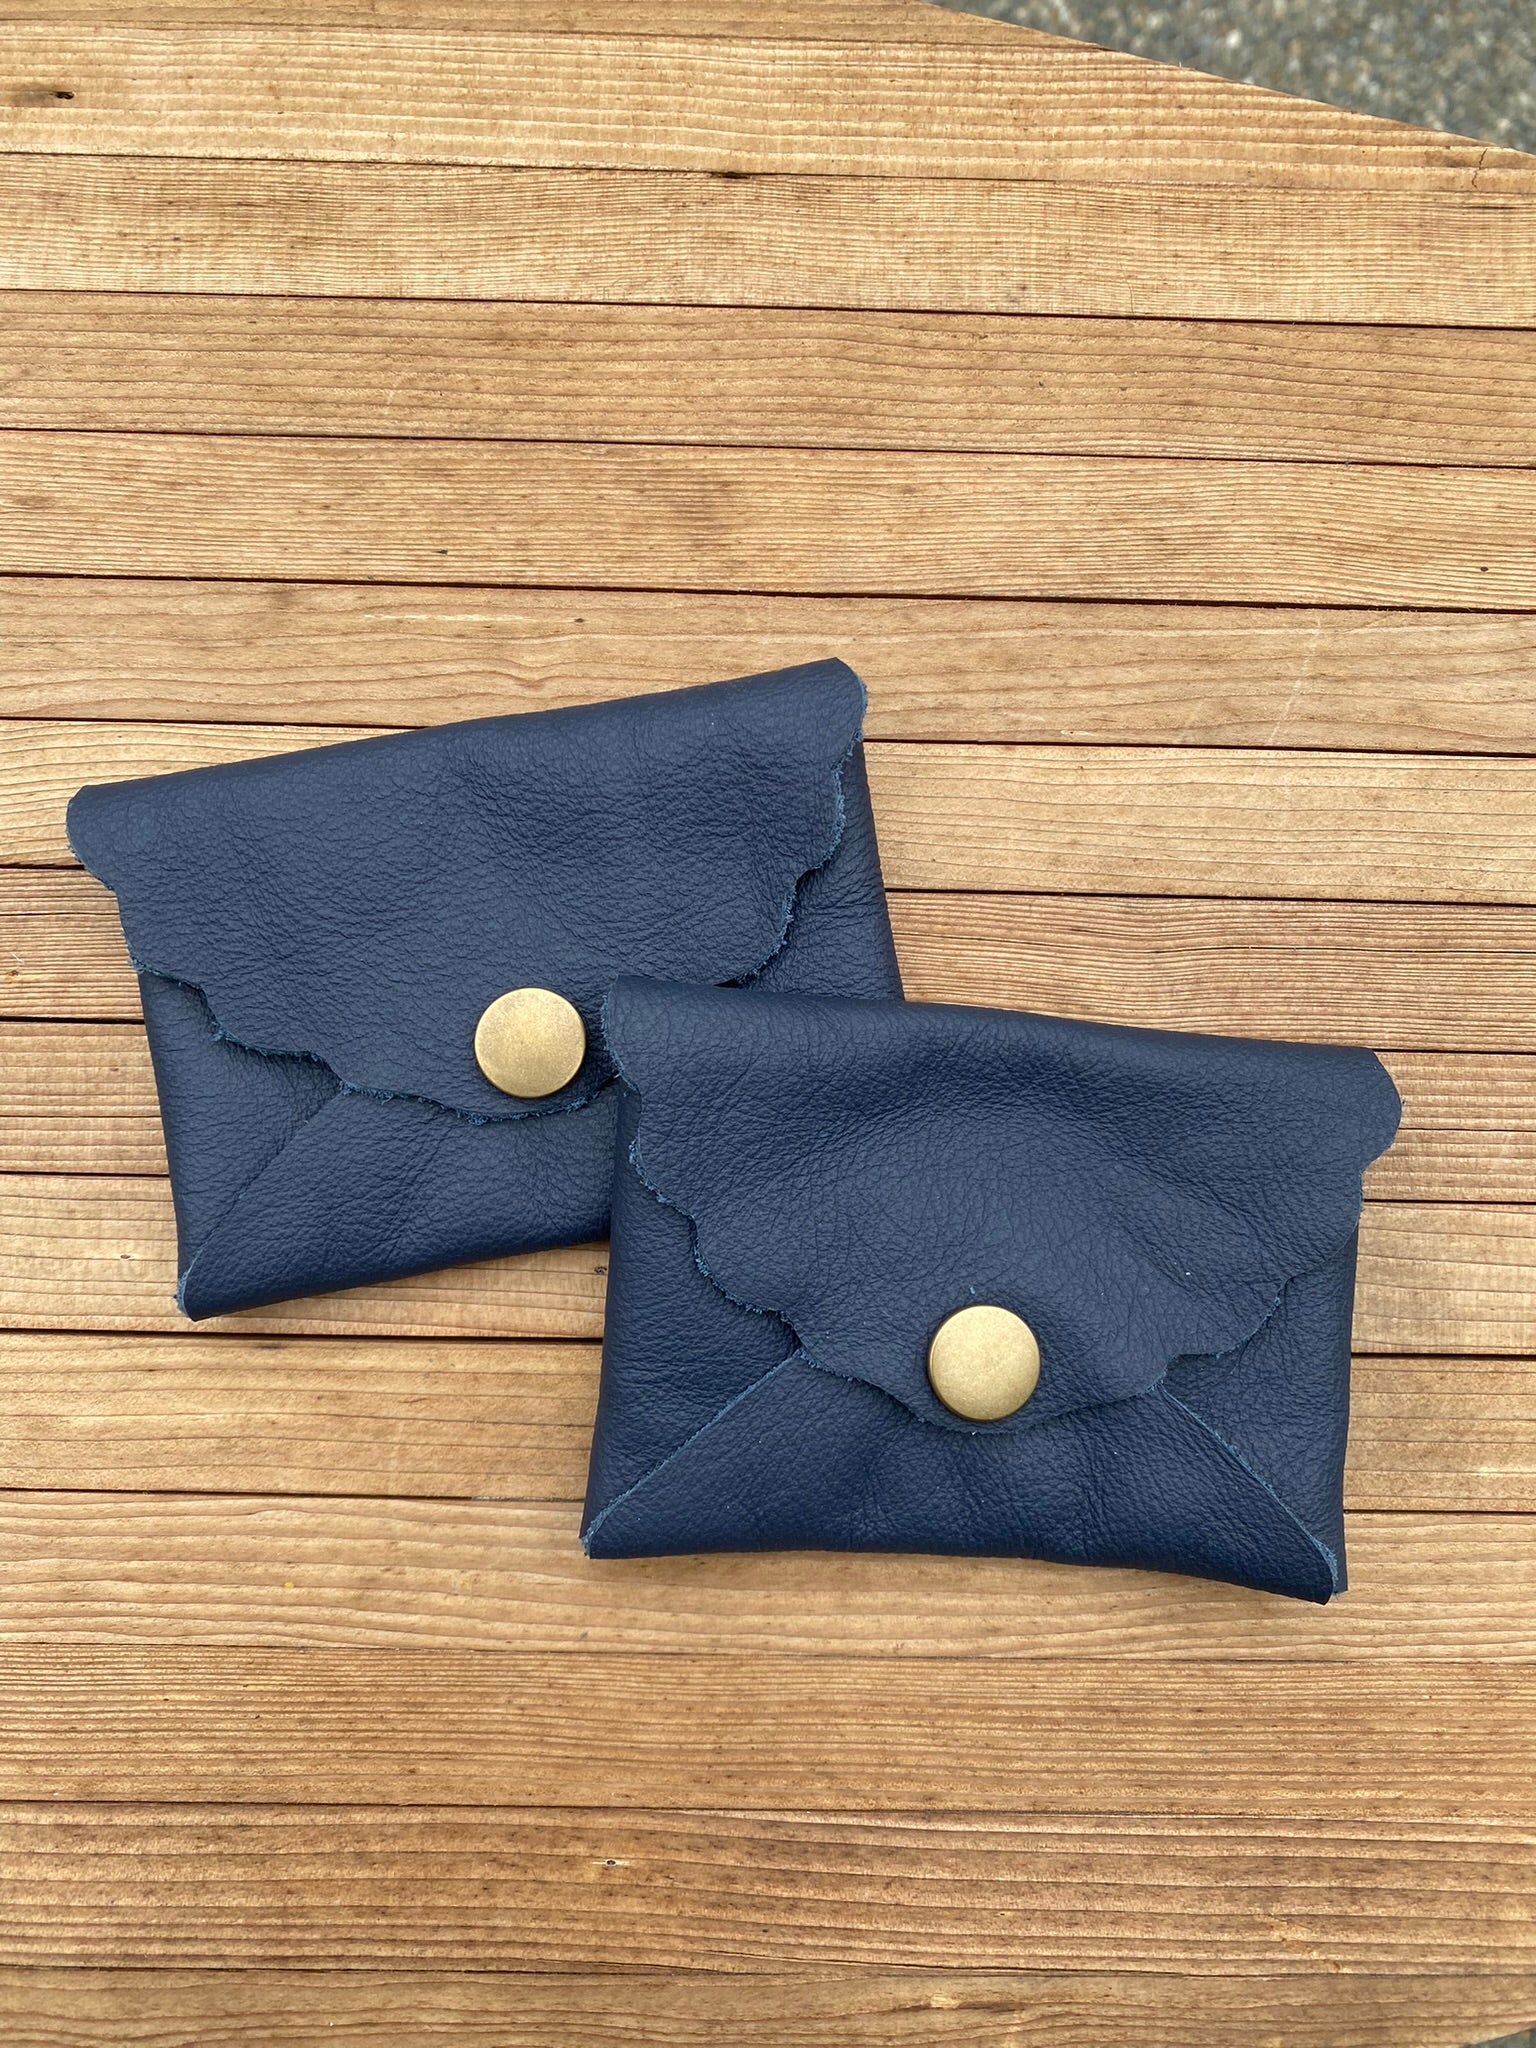 Mini Suede Leather Card Wallet, Gift Card Holder, Credit Card Snap Pouch, Small Scalloped Suede Snap Coin Purse